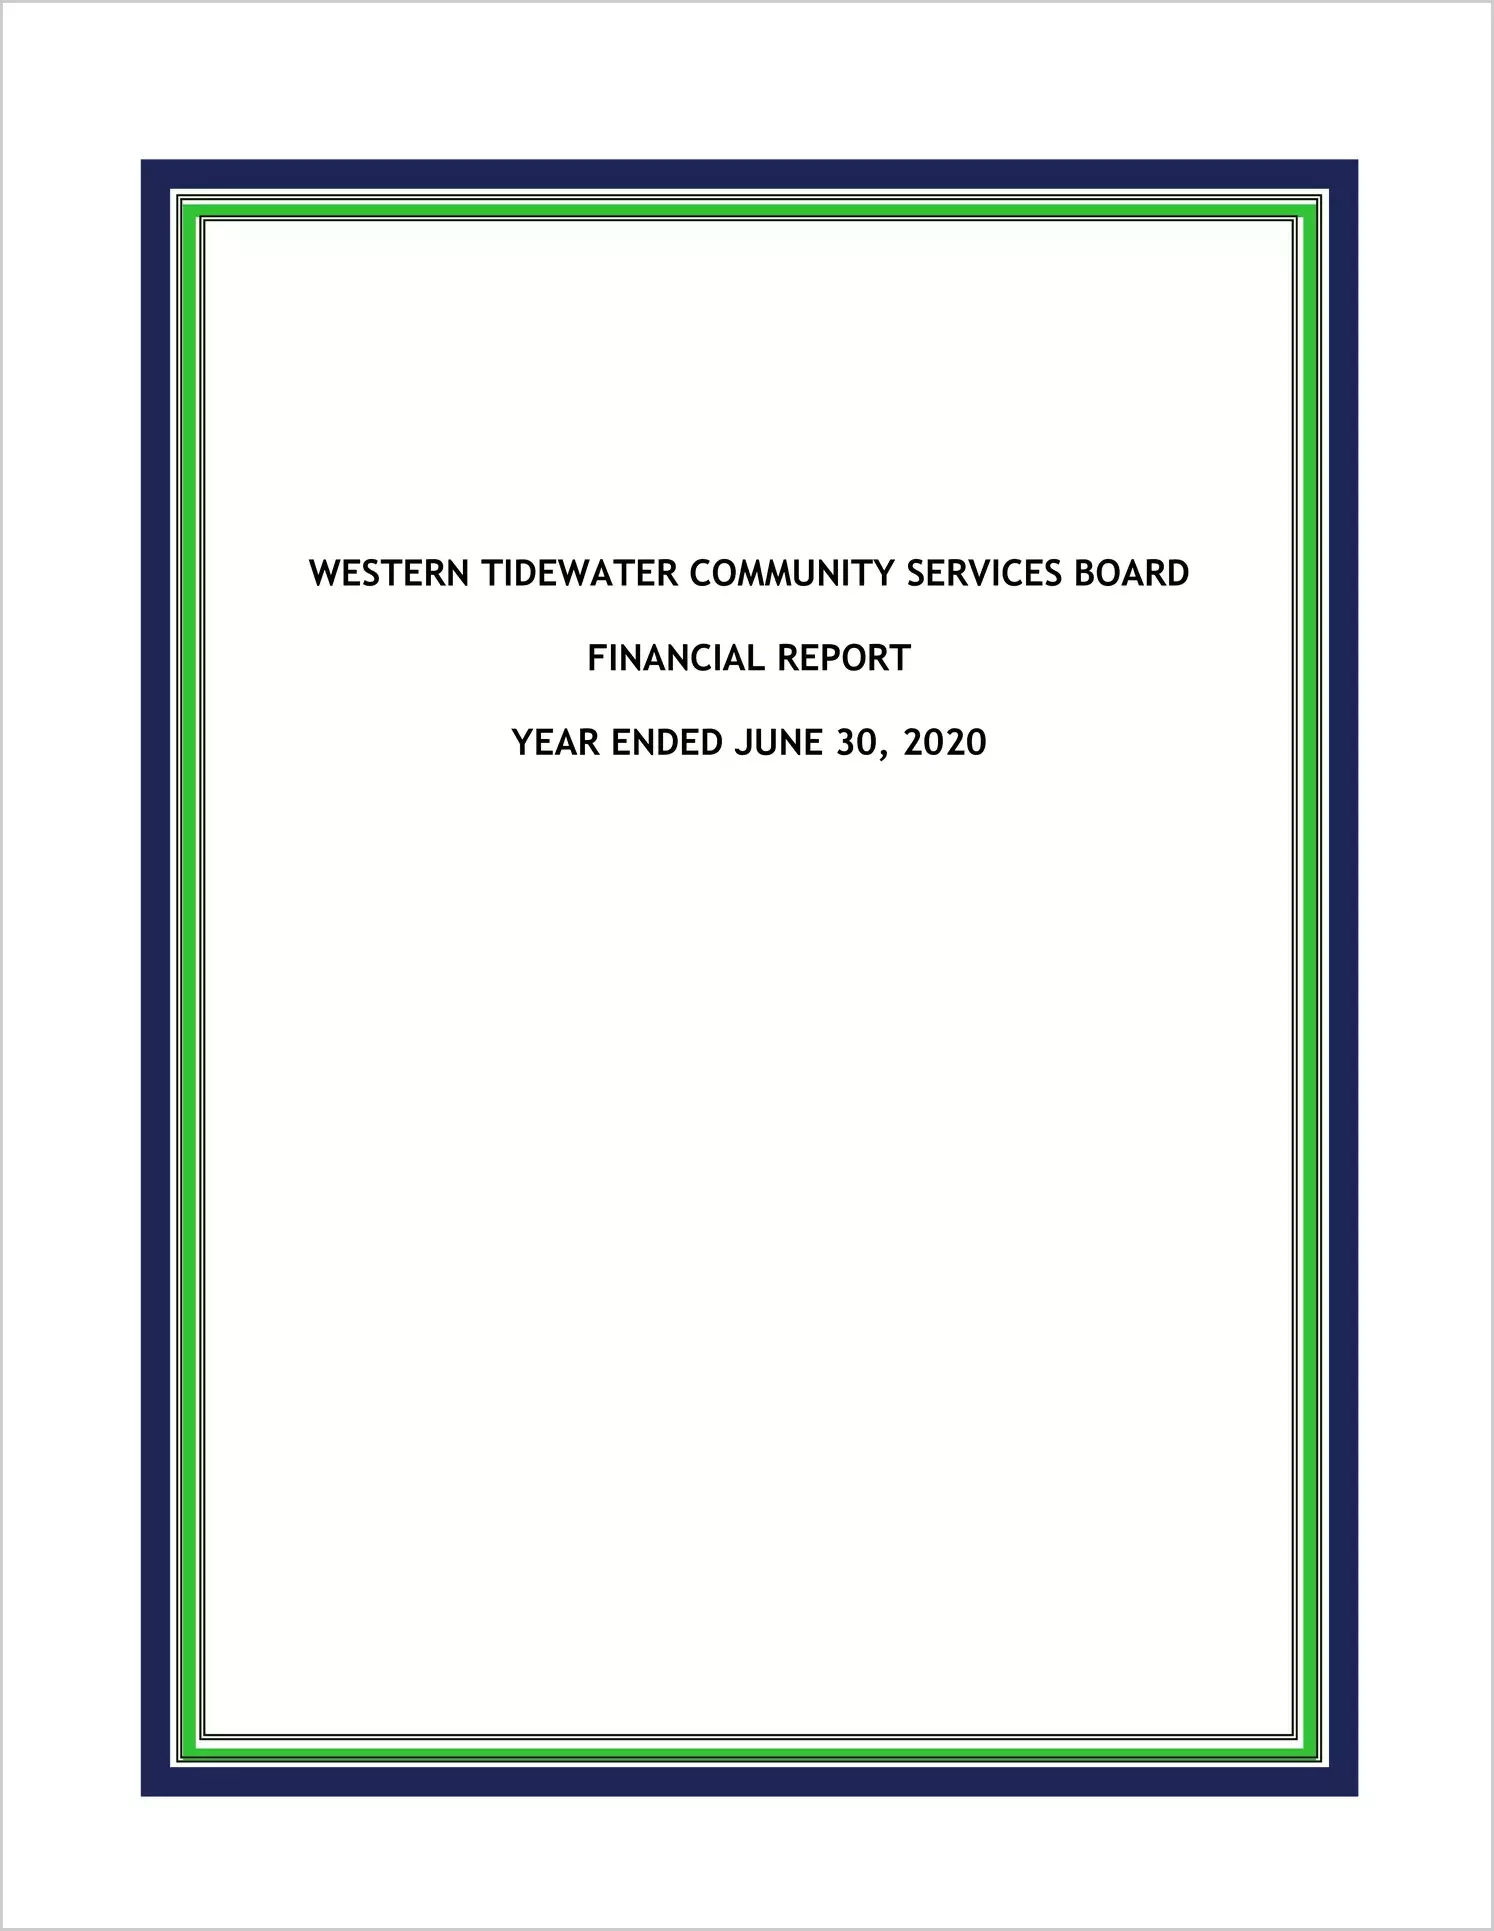 2020 ABC/Other Annual Financial Report  for Western Tidewater Community Services Board 